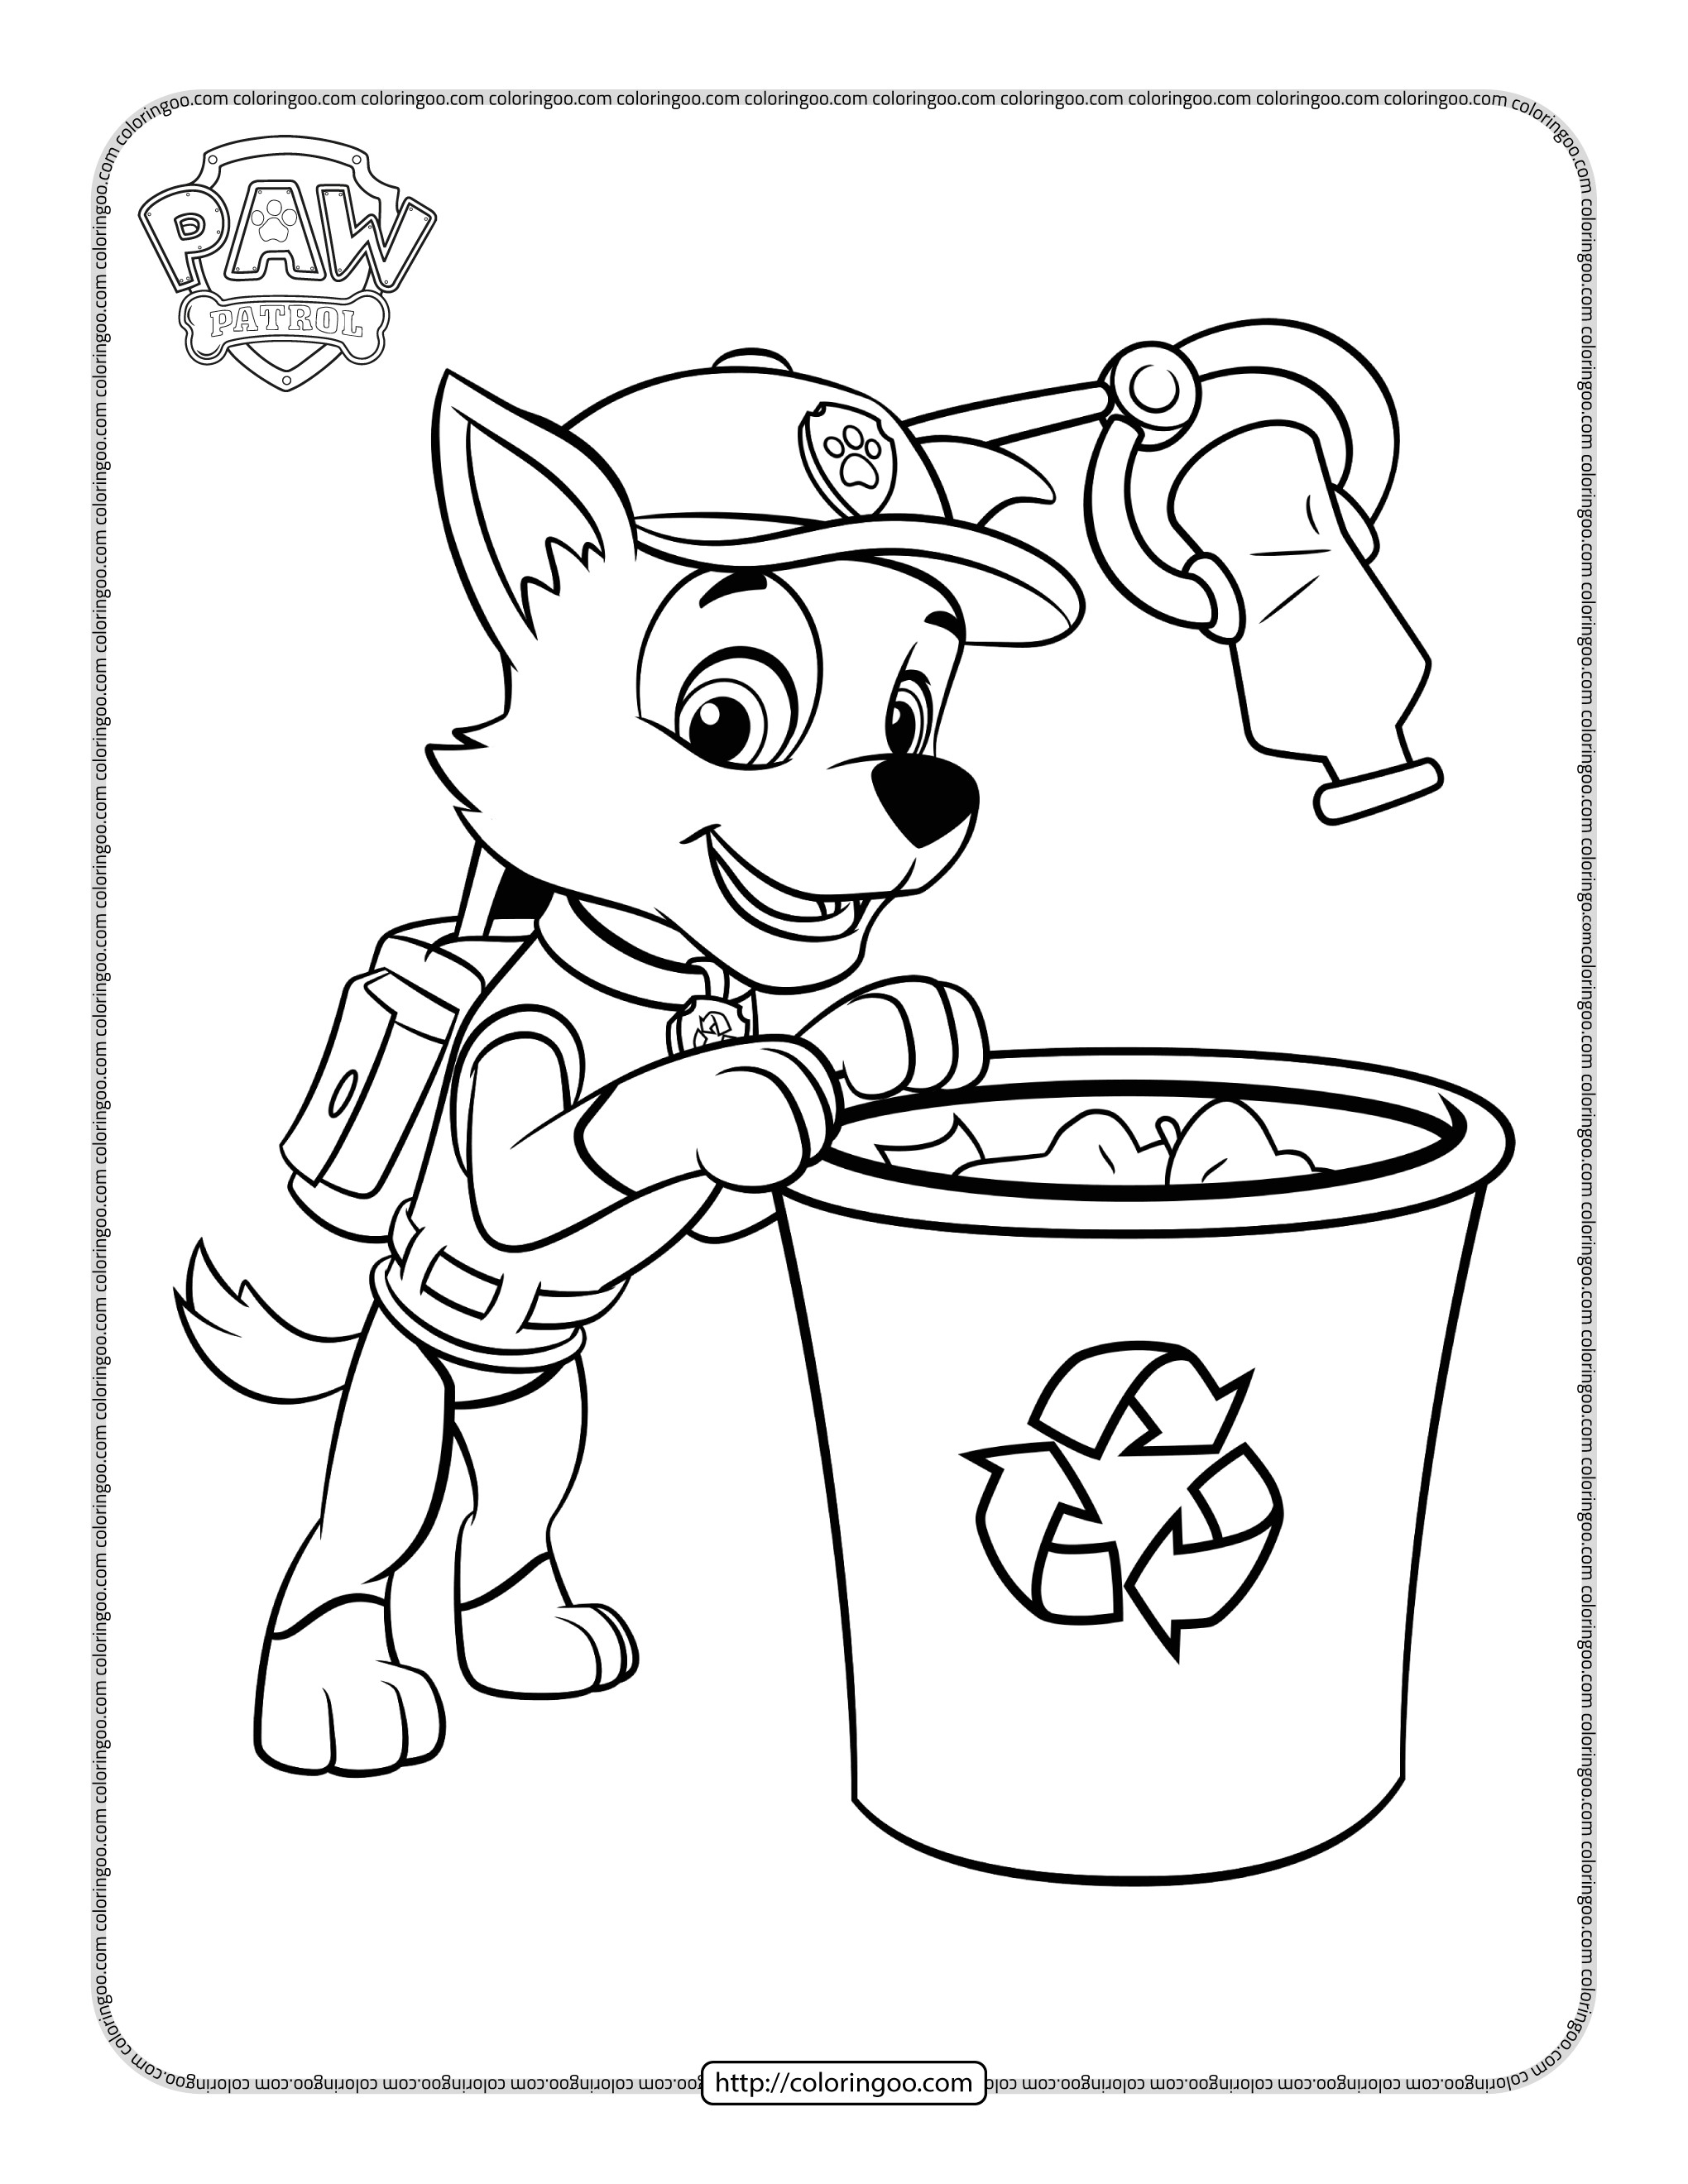 paw patrol rocky recycles waste coloring page